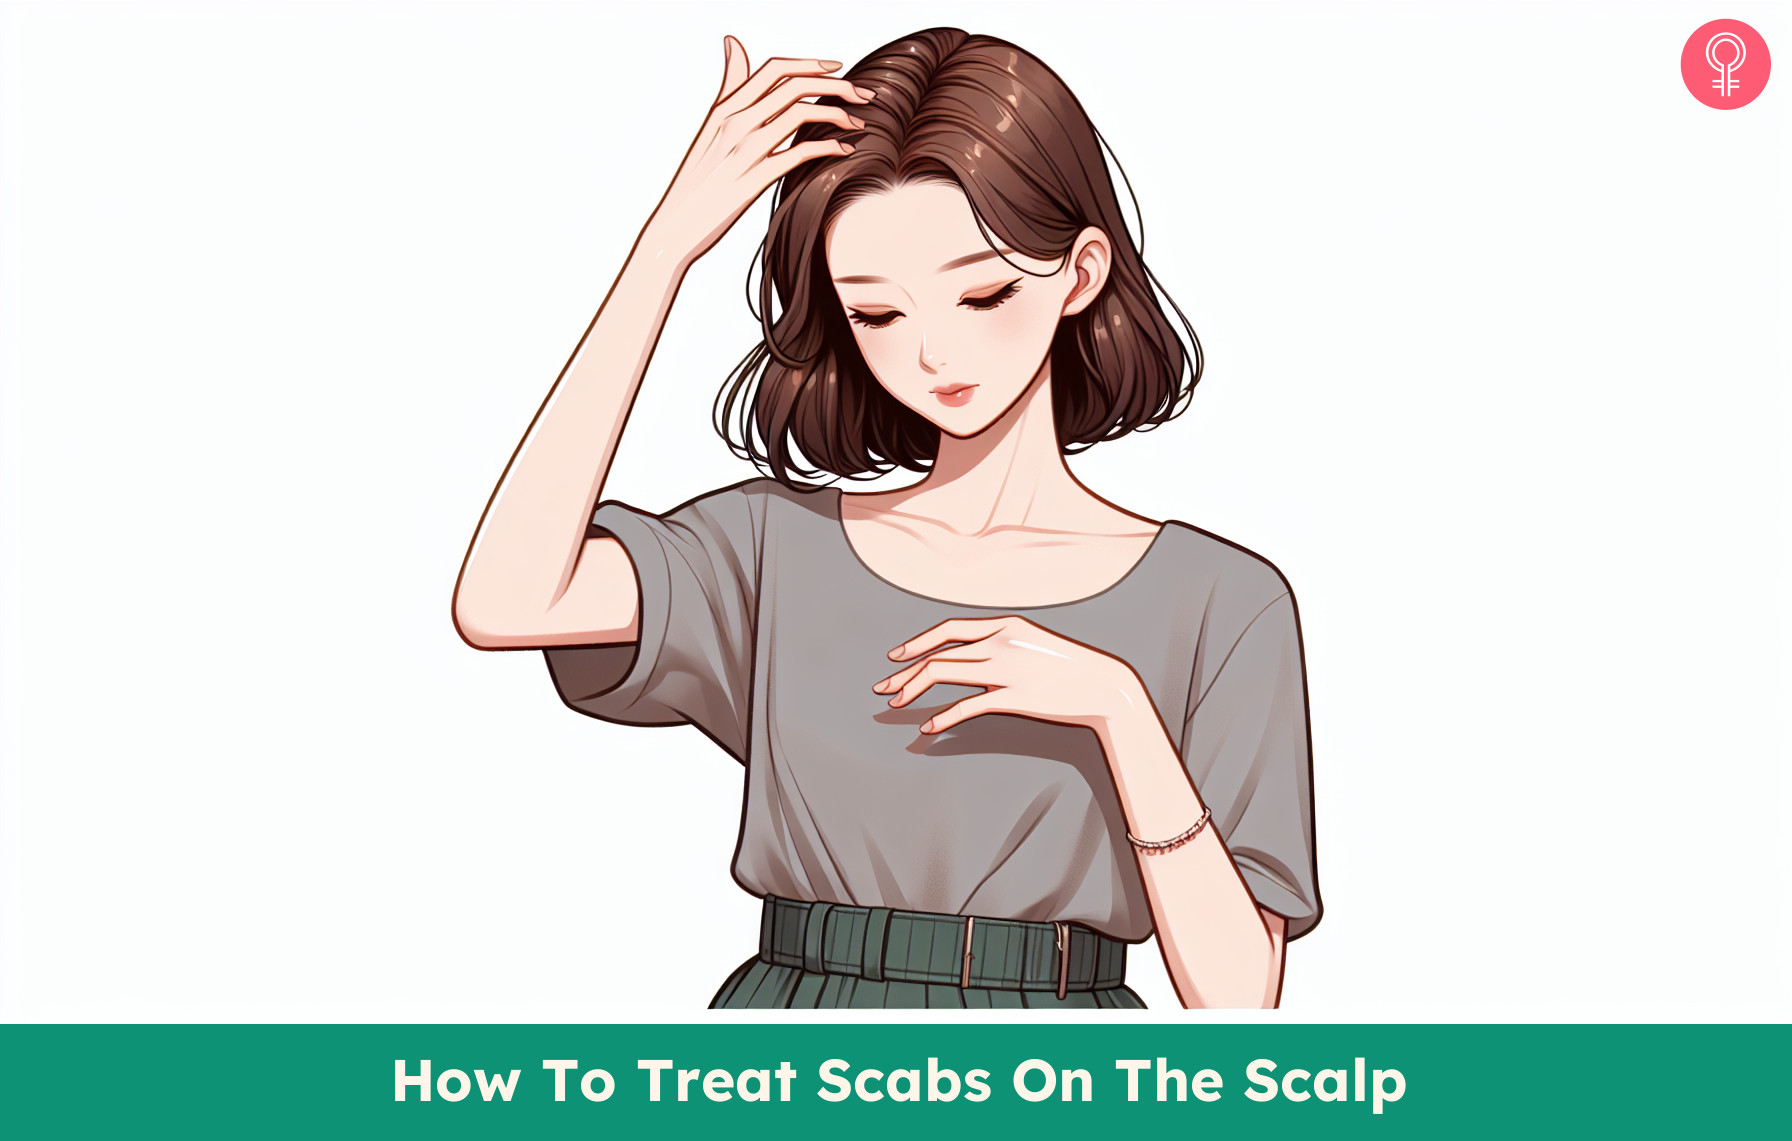 Treat Scabs On The Scalp